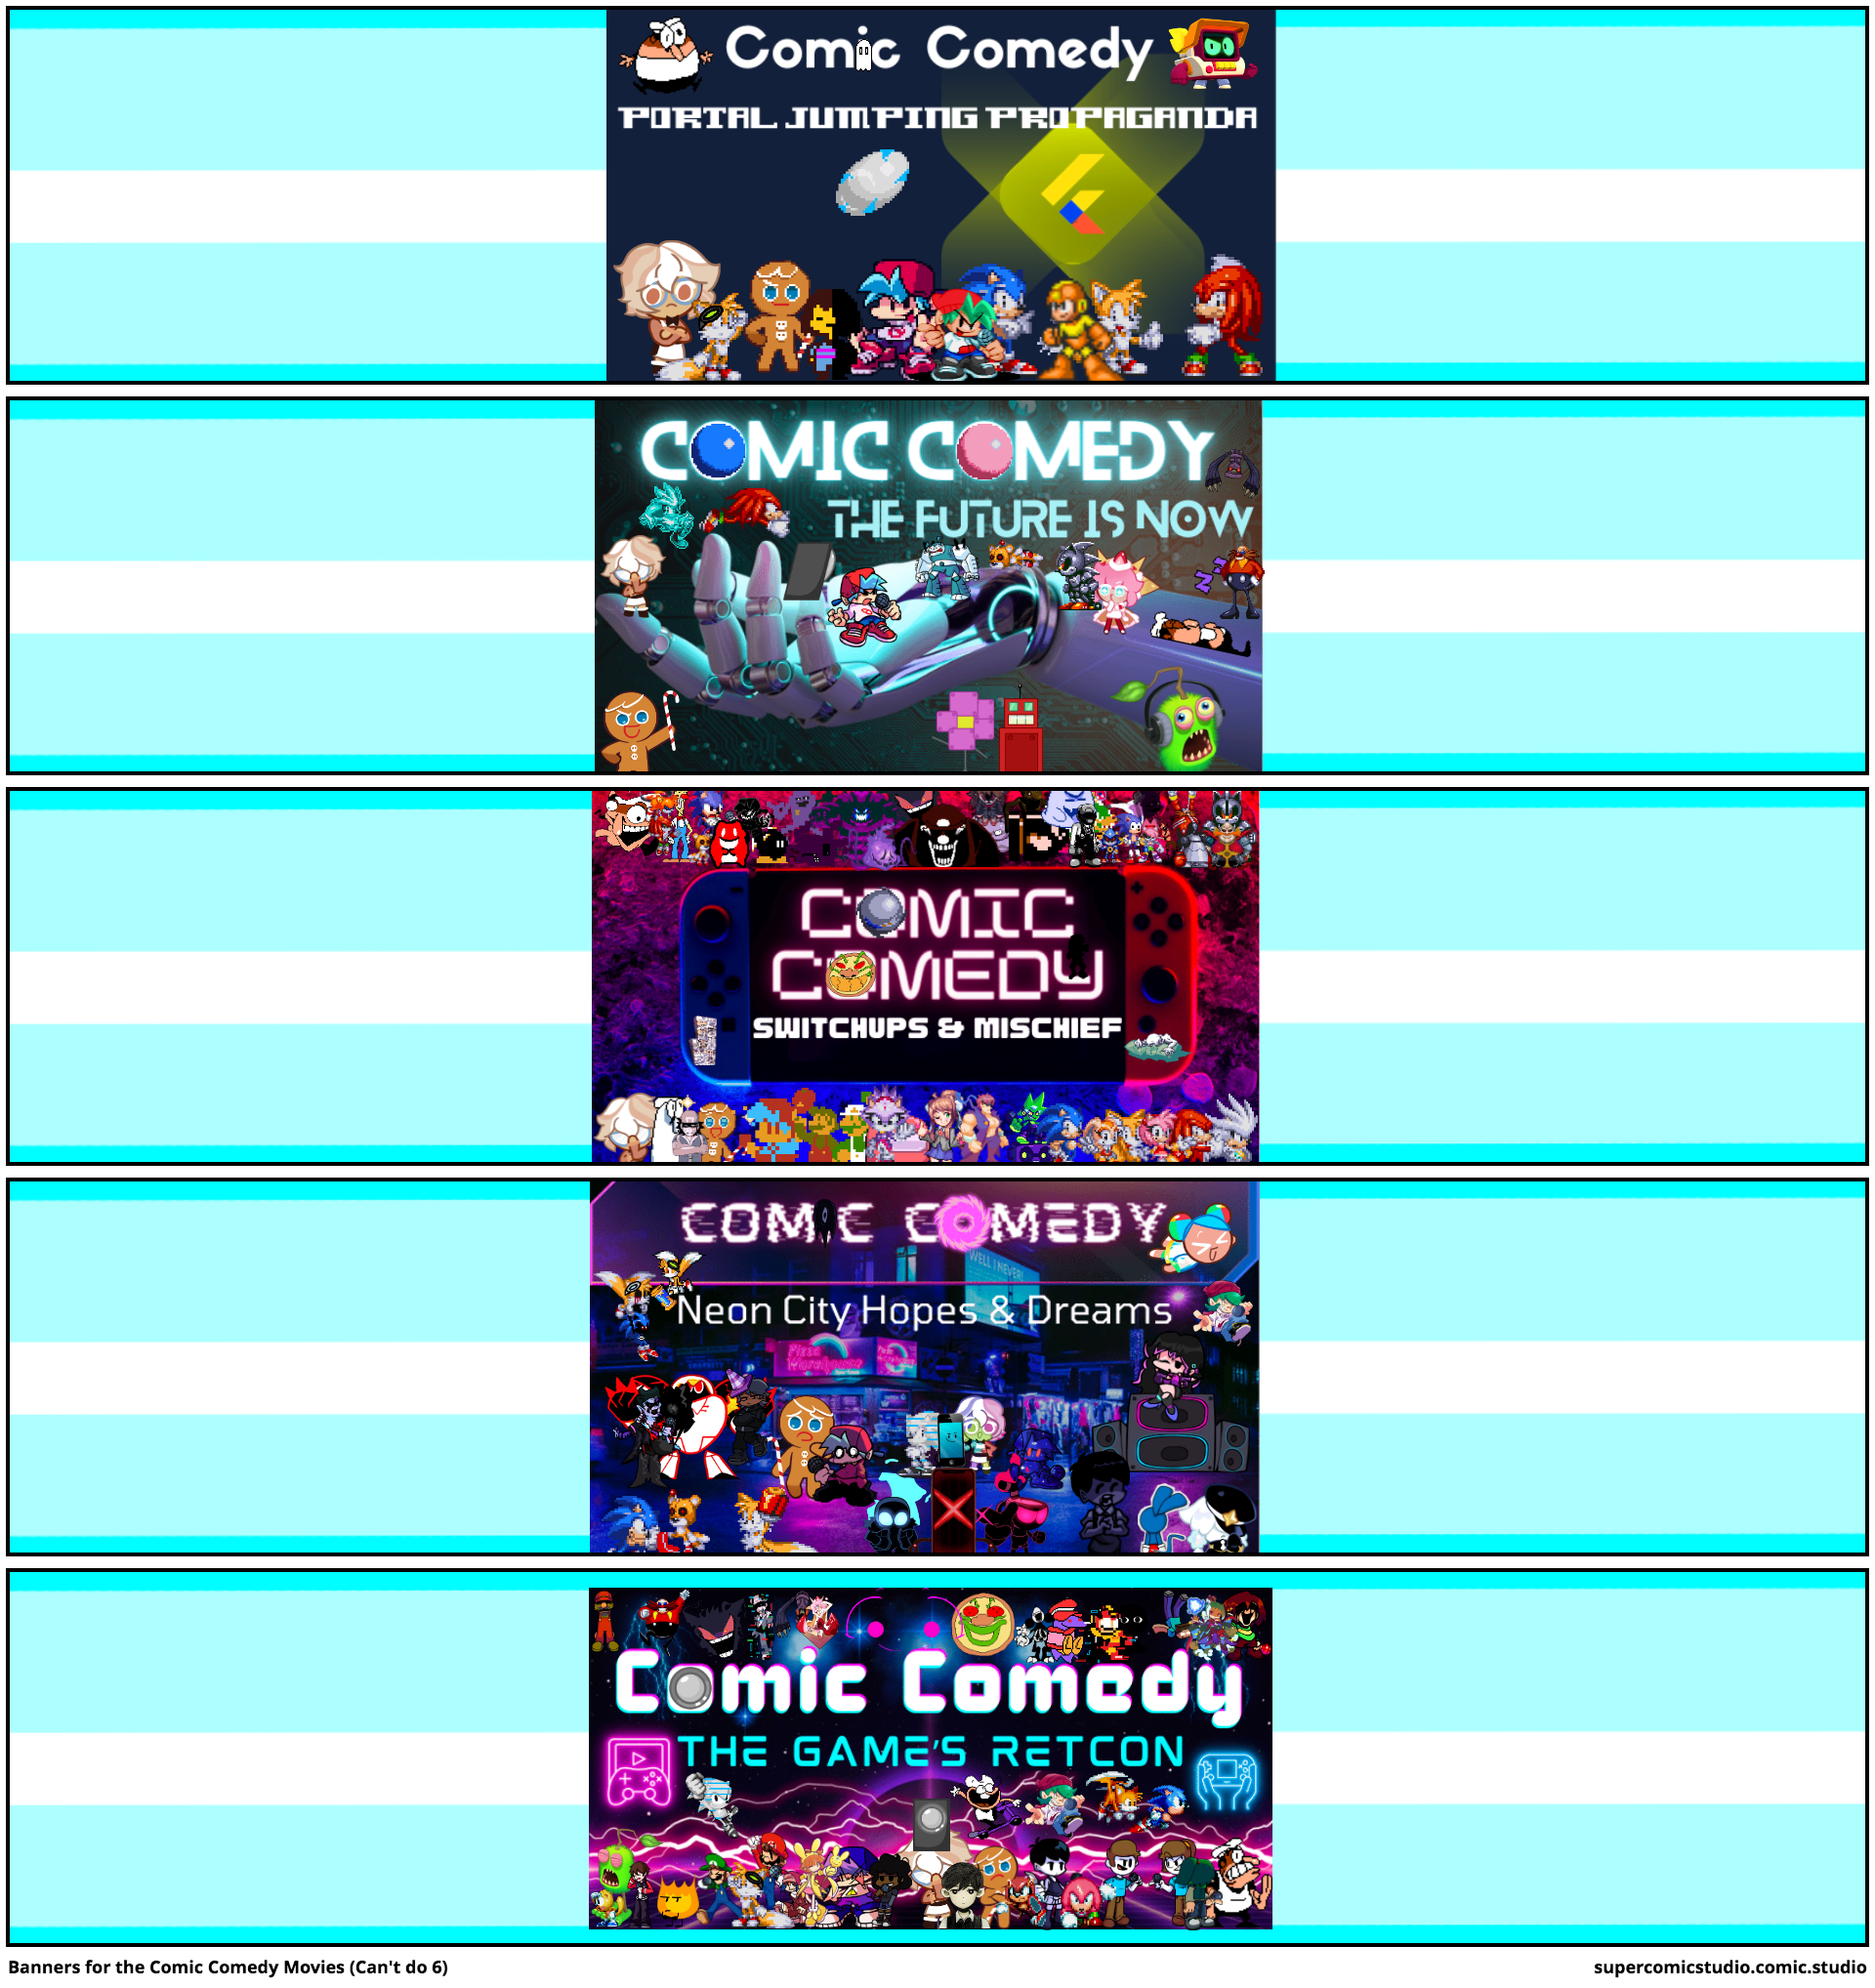 Banners for the Comic Comedy Movies (Can't do 6)